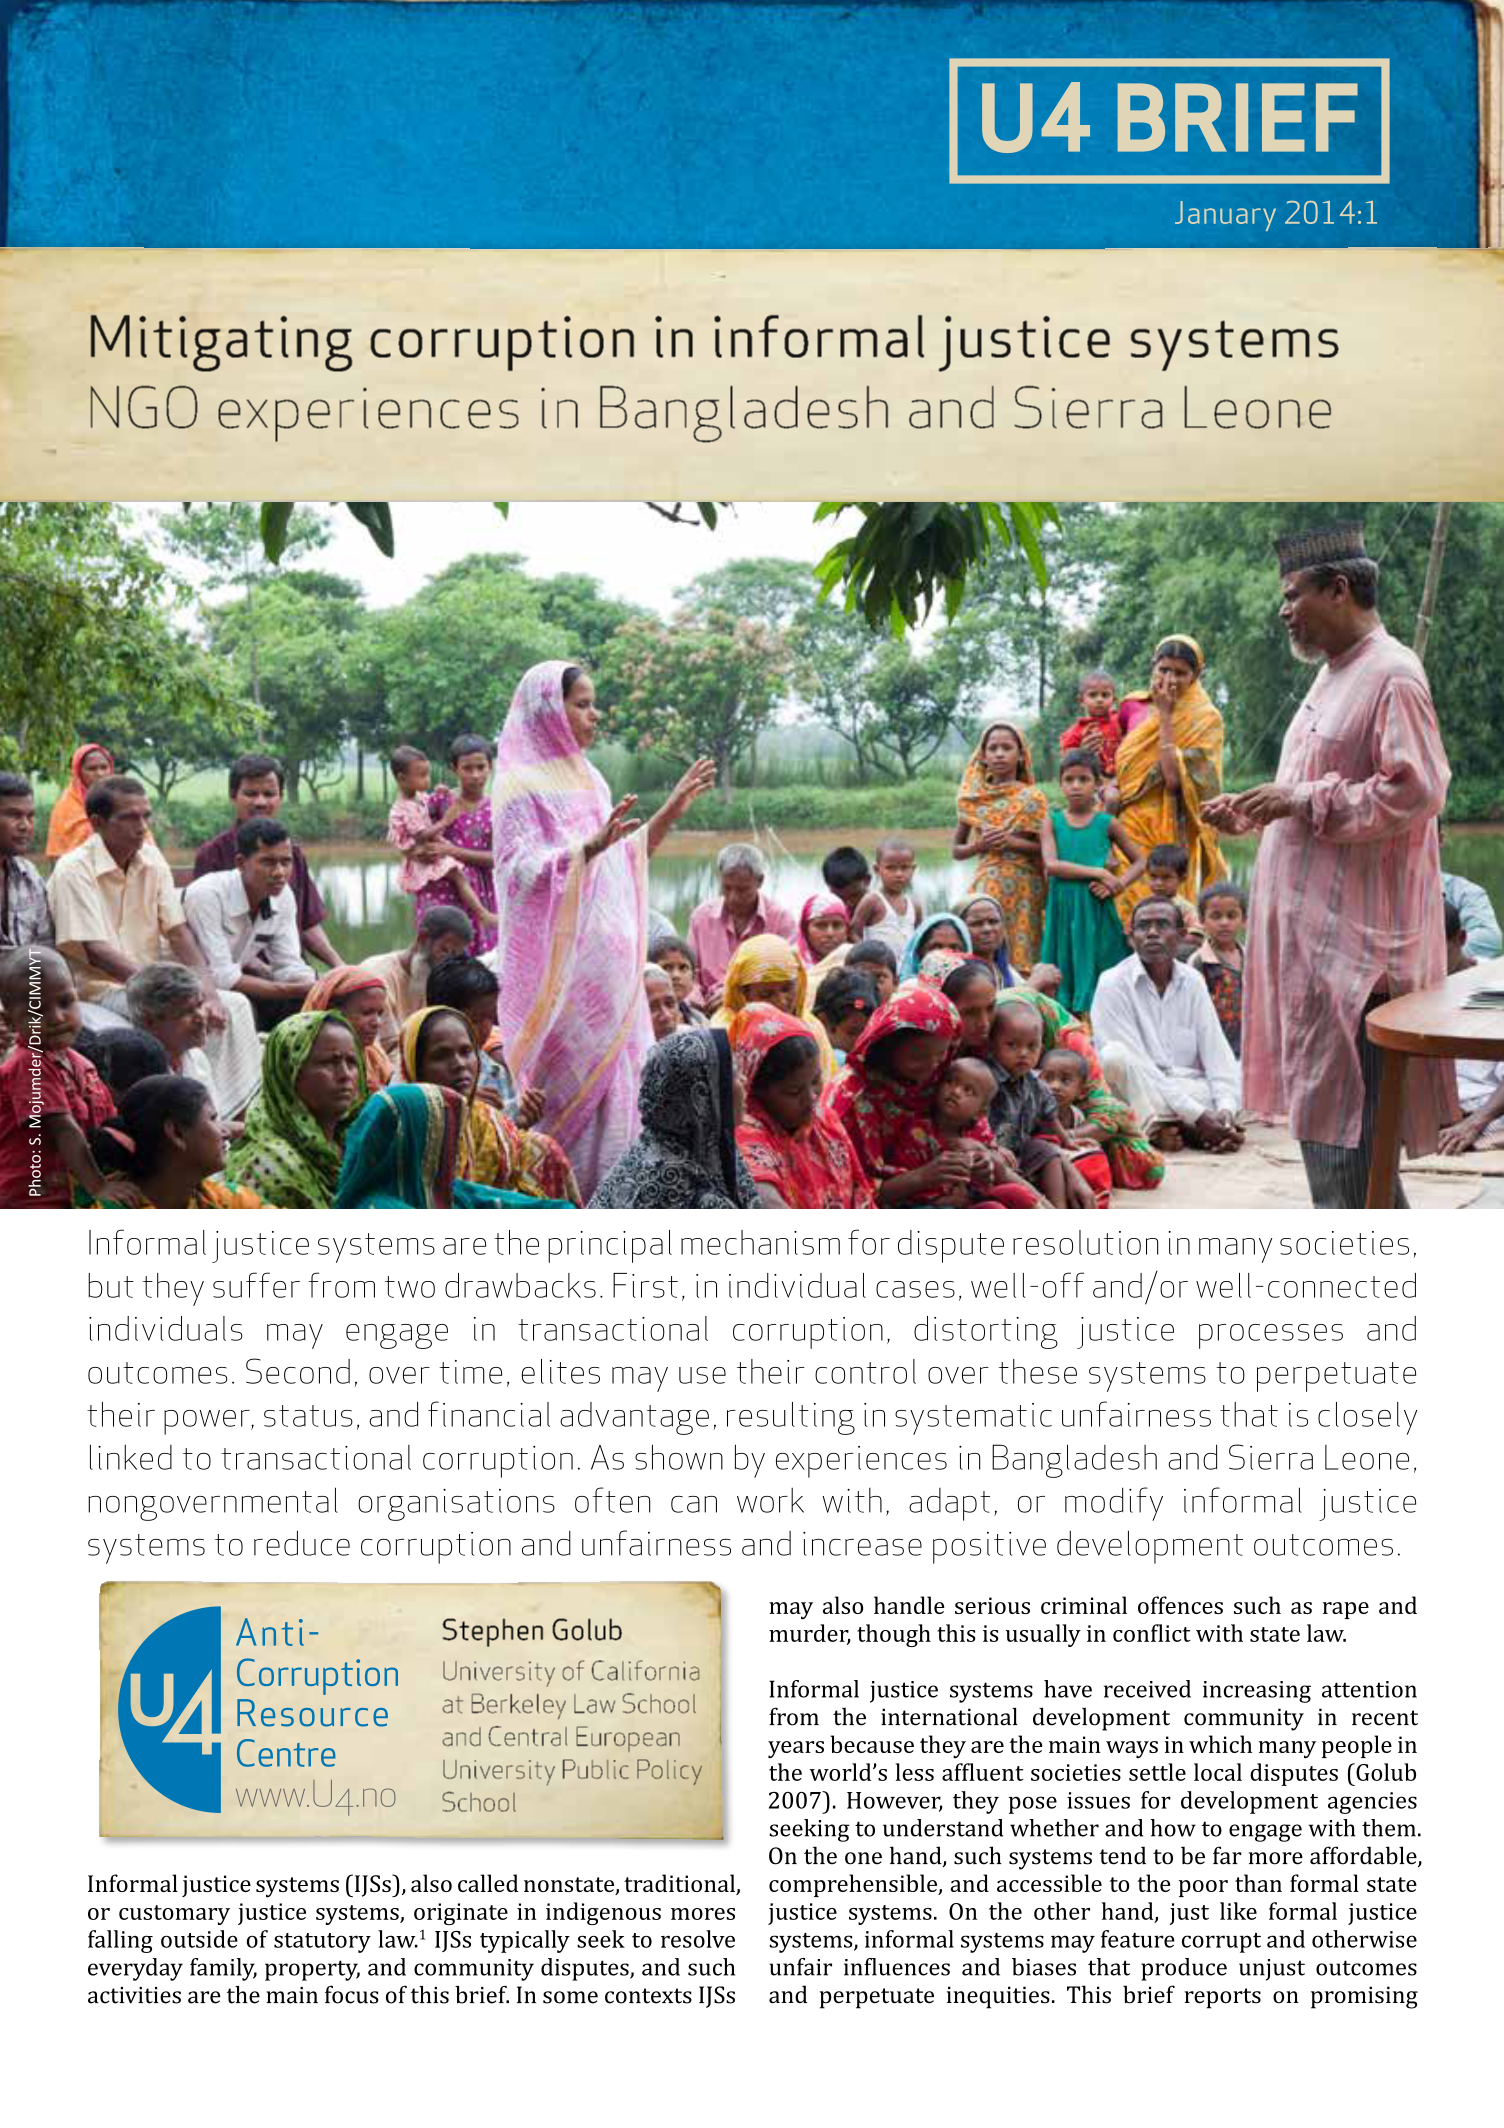 Mitigating corruption in informal justice systems: NGO experiences in Bangladesh and Sierra Leone